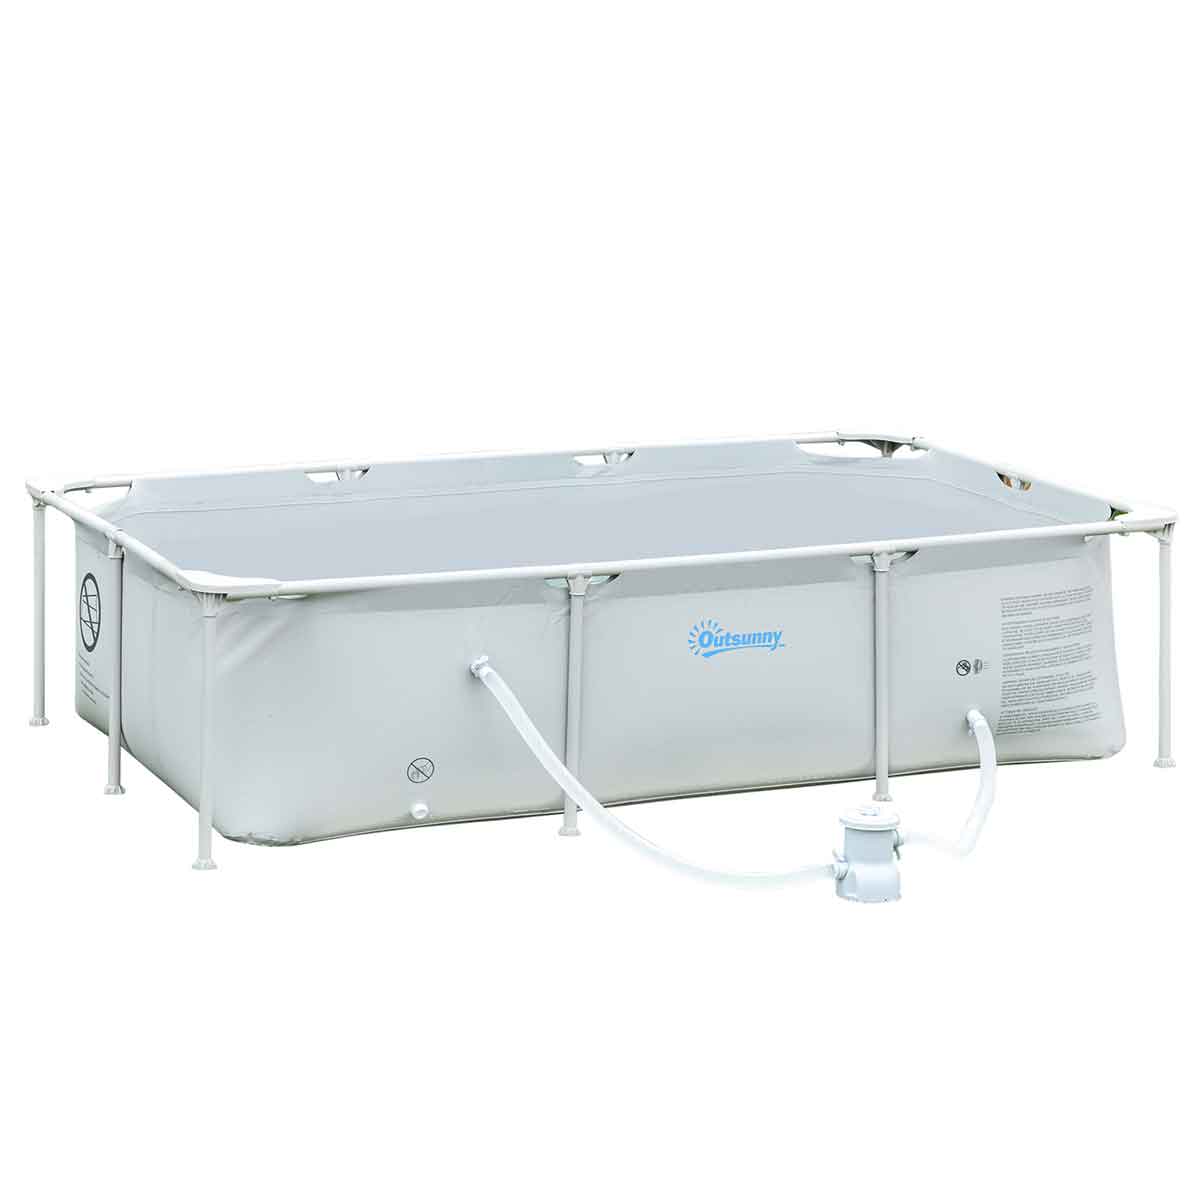 Alfresco Steel Frame Swimming Pool with Filter Pump, Grey